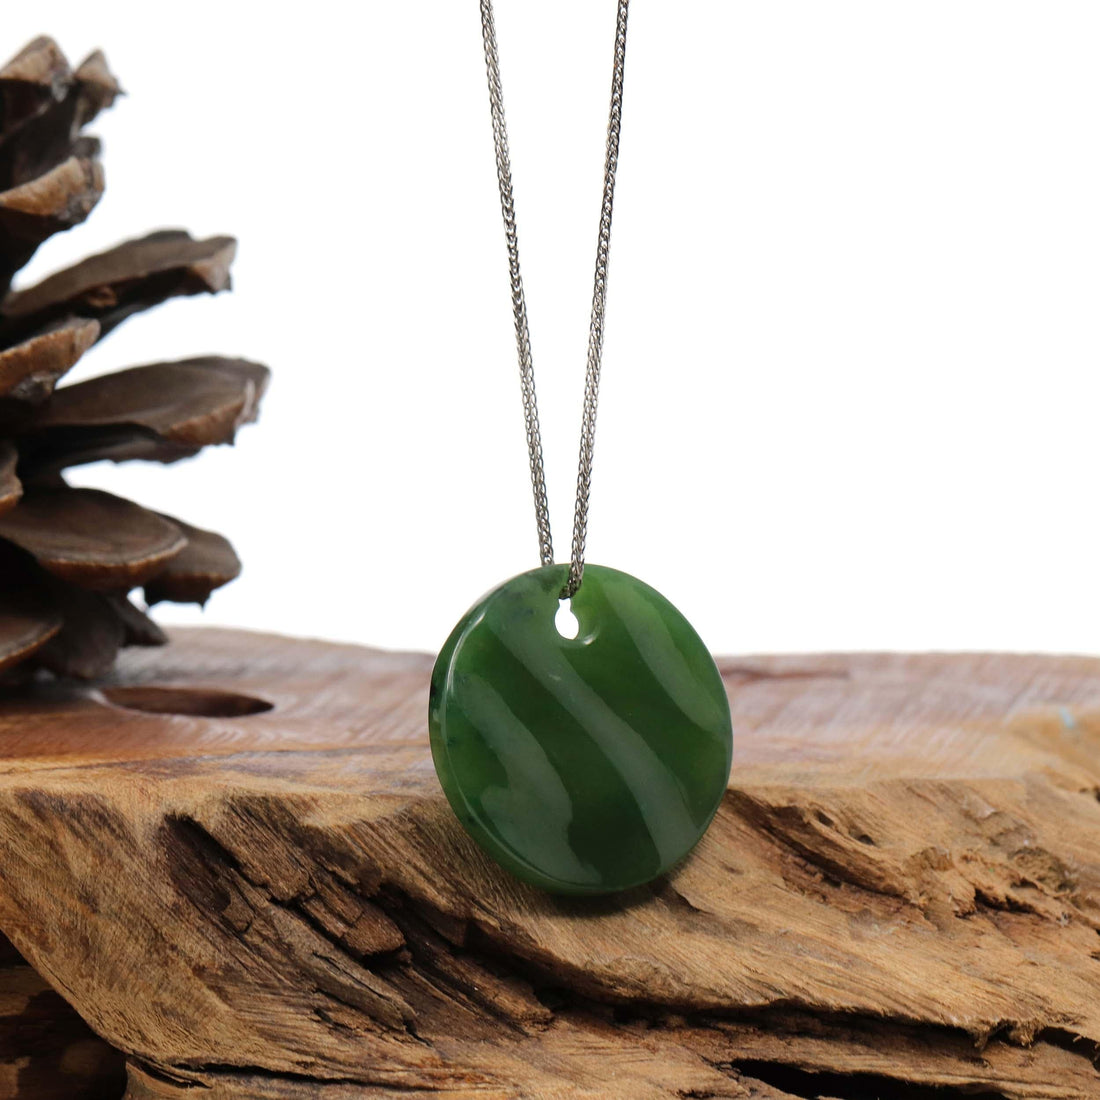 Baikalla Jewelry Jade Pendant Necklace Sterling Silver Nephrite Green Water Pendant Necklace